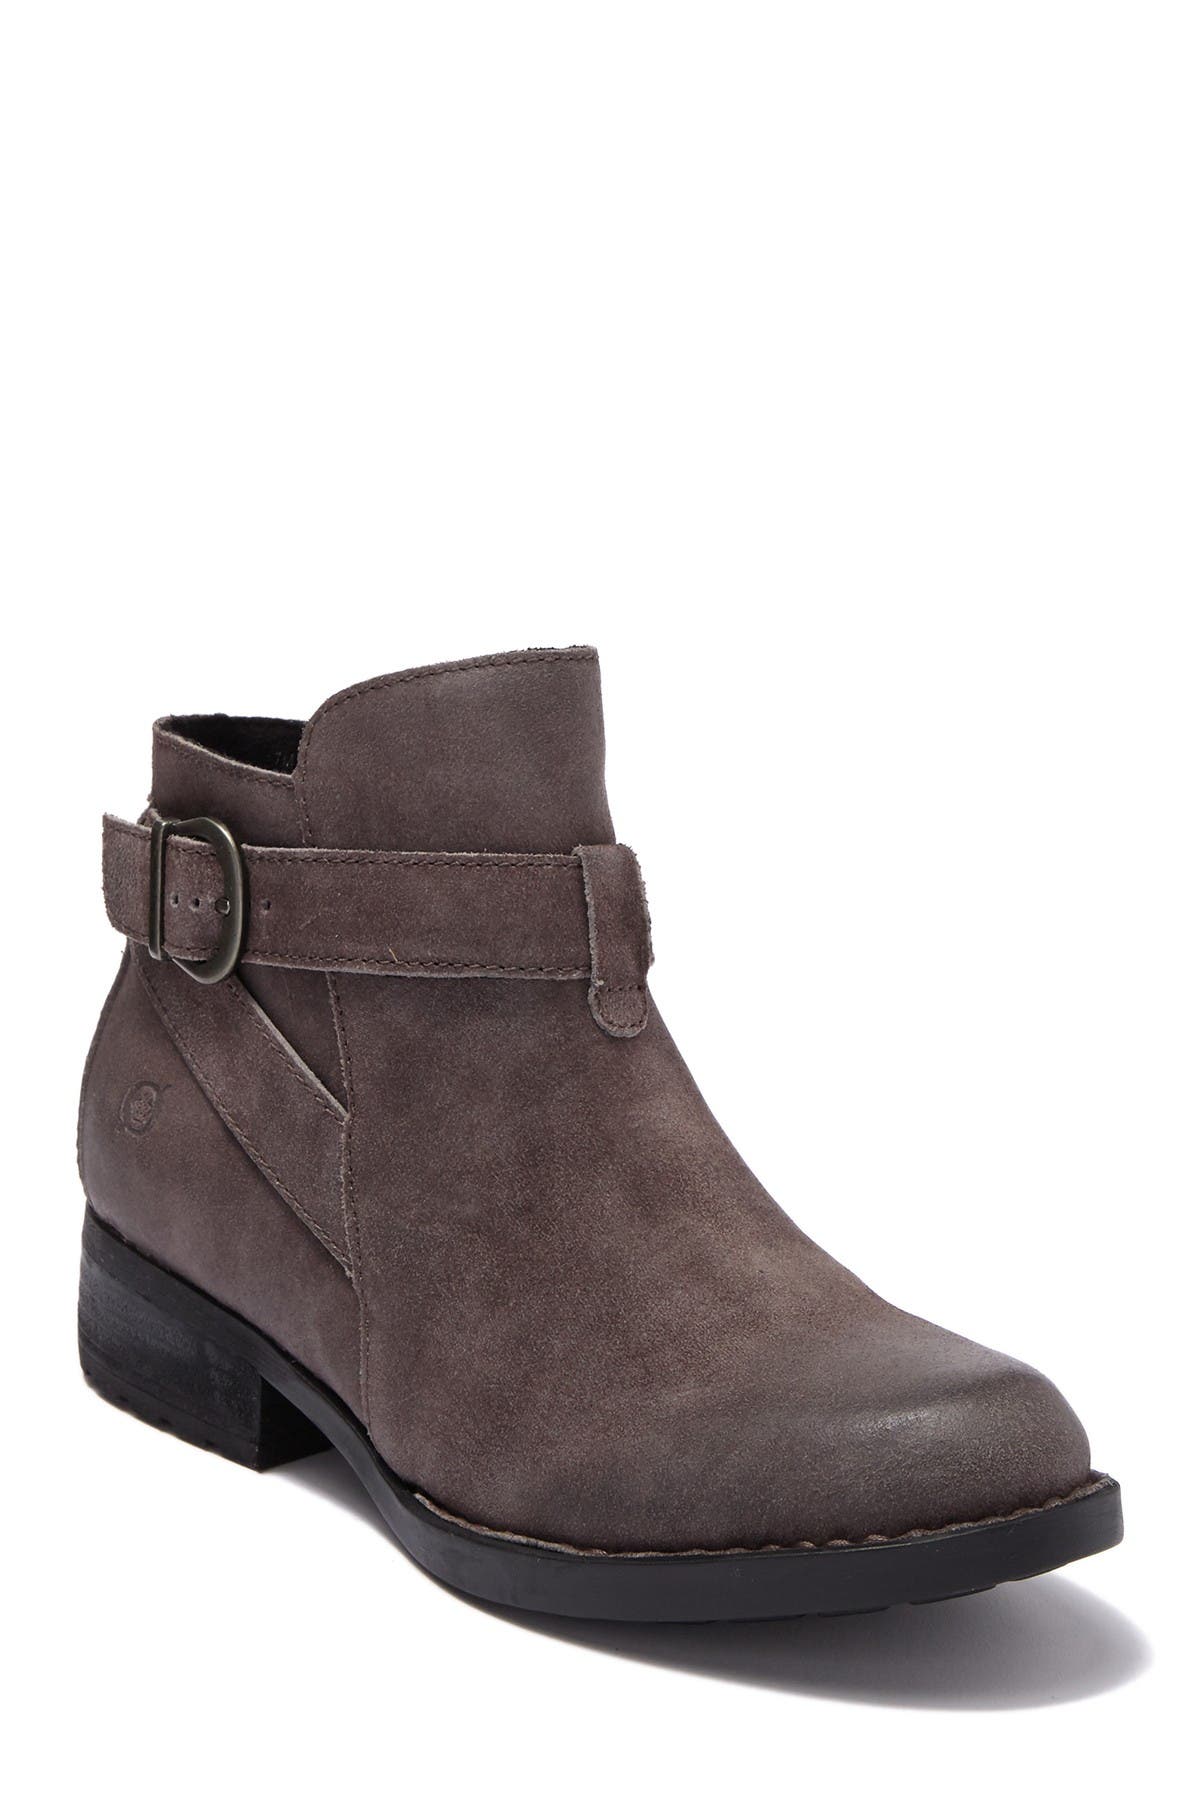 born joly tall suede double buckle strap boots